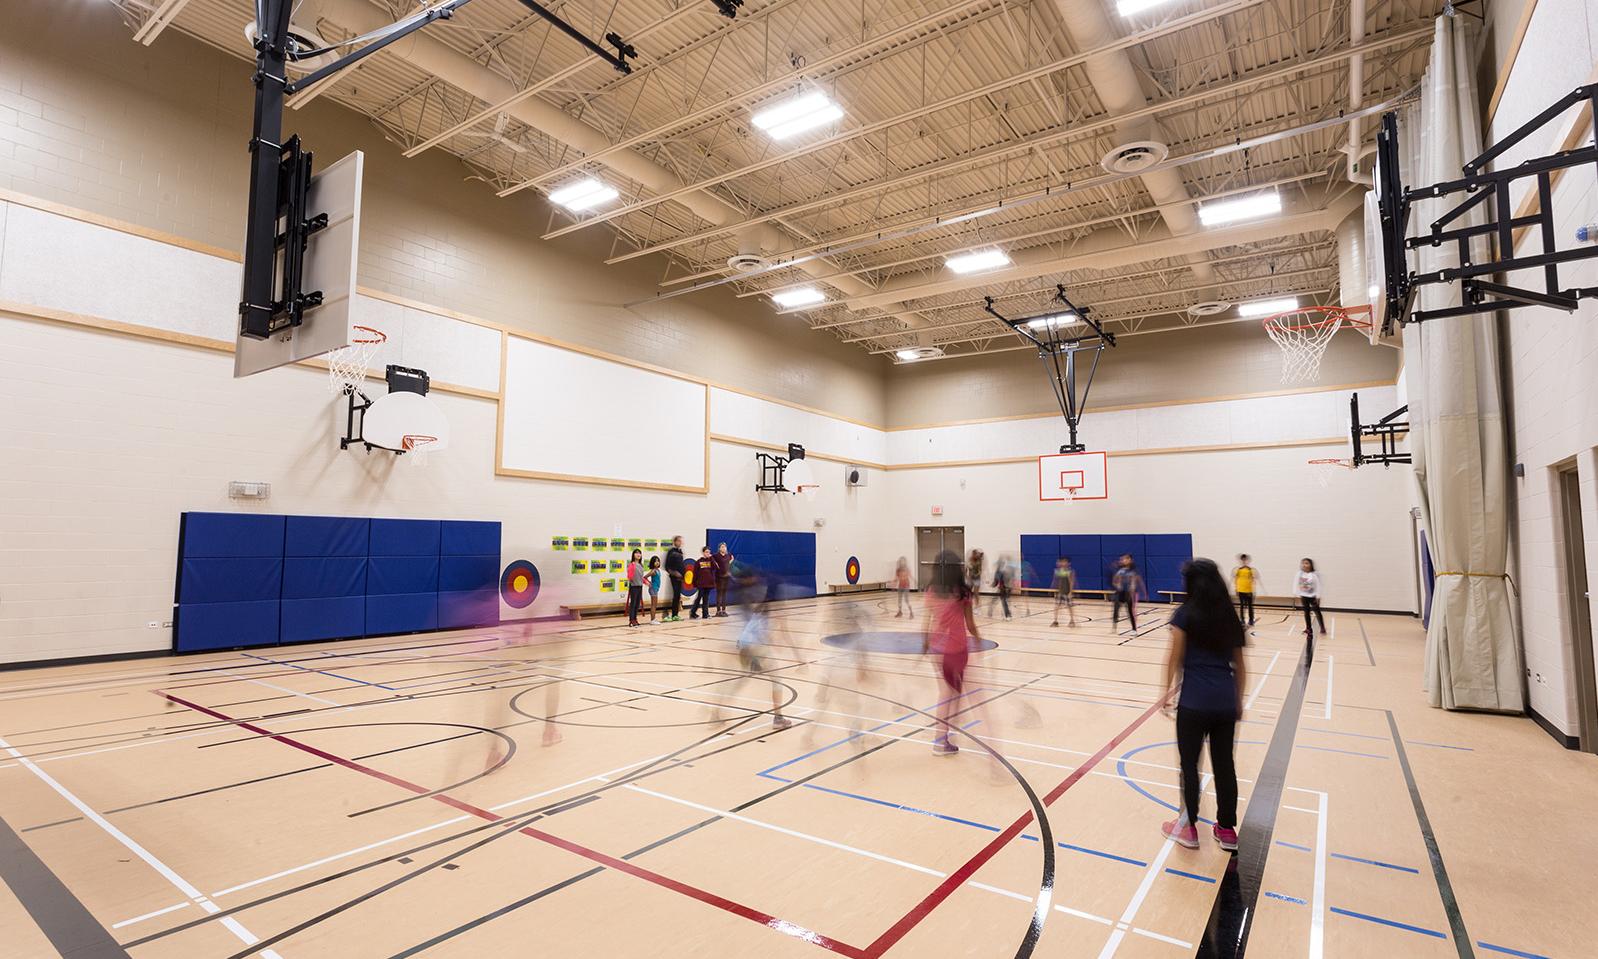 Lord Nelson School. Inside the new gym showing basketball court. 